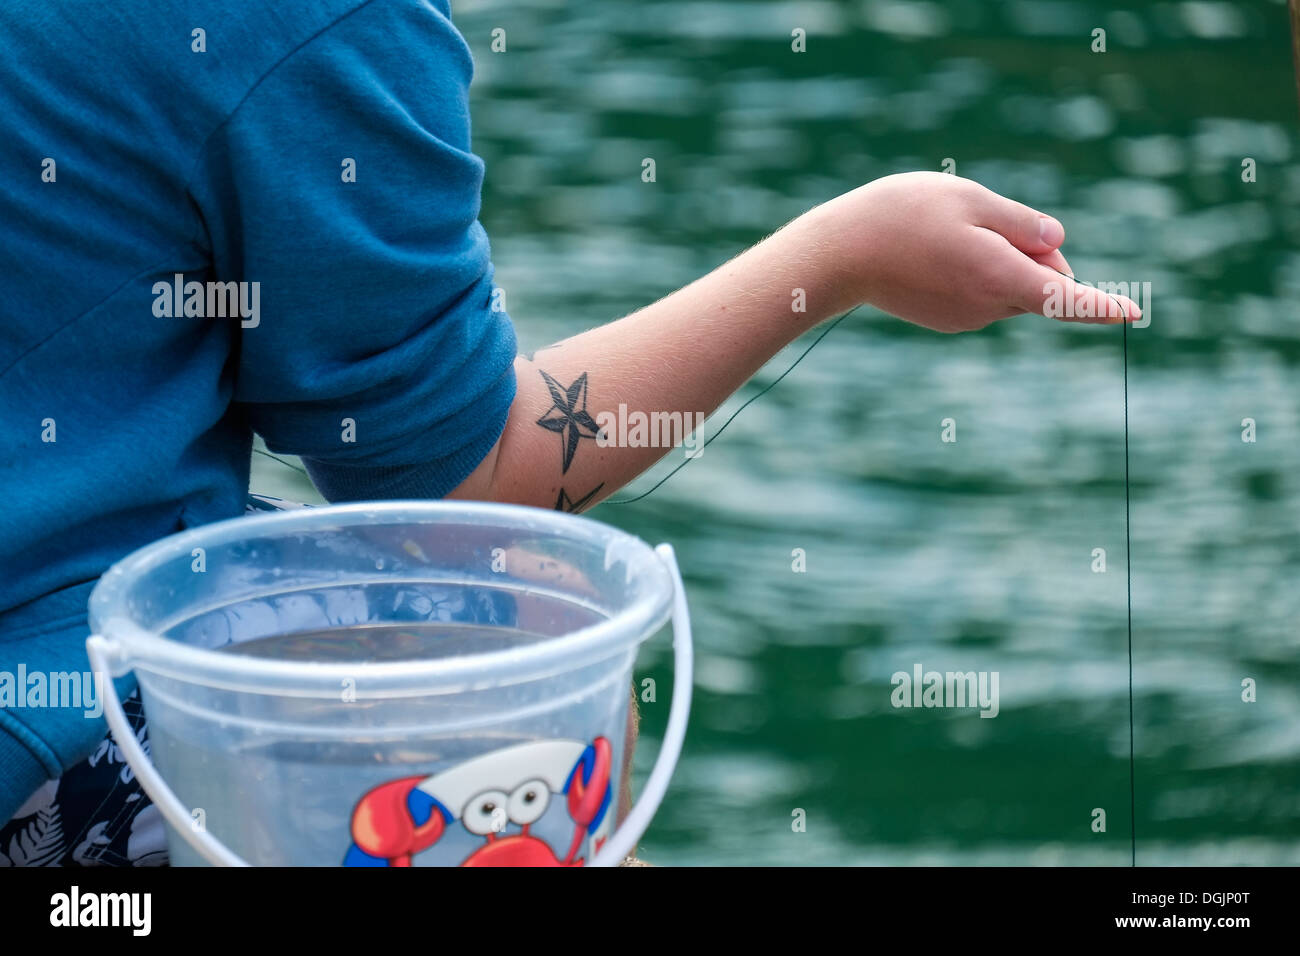 A tattooed person fishing for crabs. Stock Photo